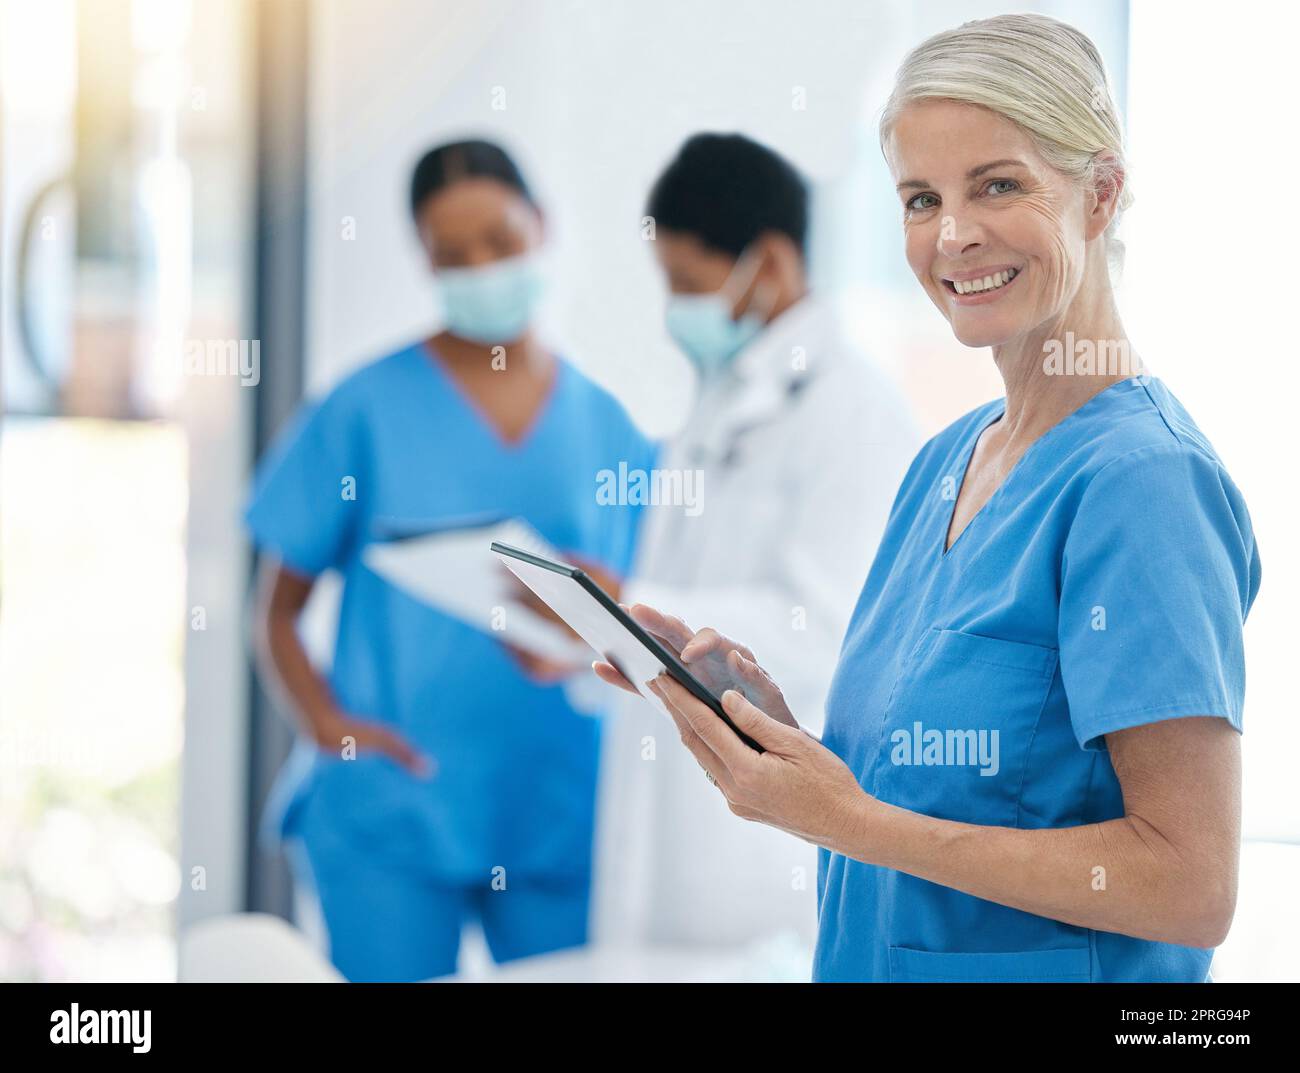 Doctor, smile and medical healthcare professional on tablet for patient records working in hospital building. Trust, consultation and medicine nurse worker with team of health experts Stock Photo